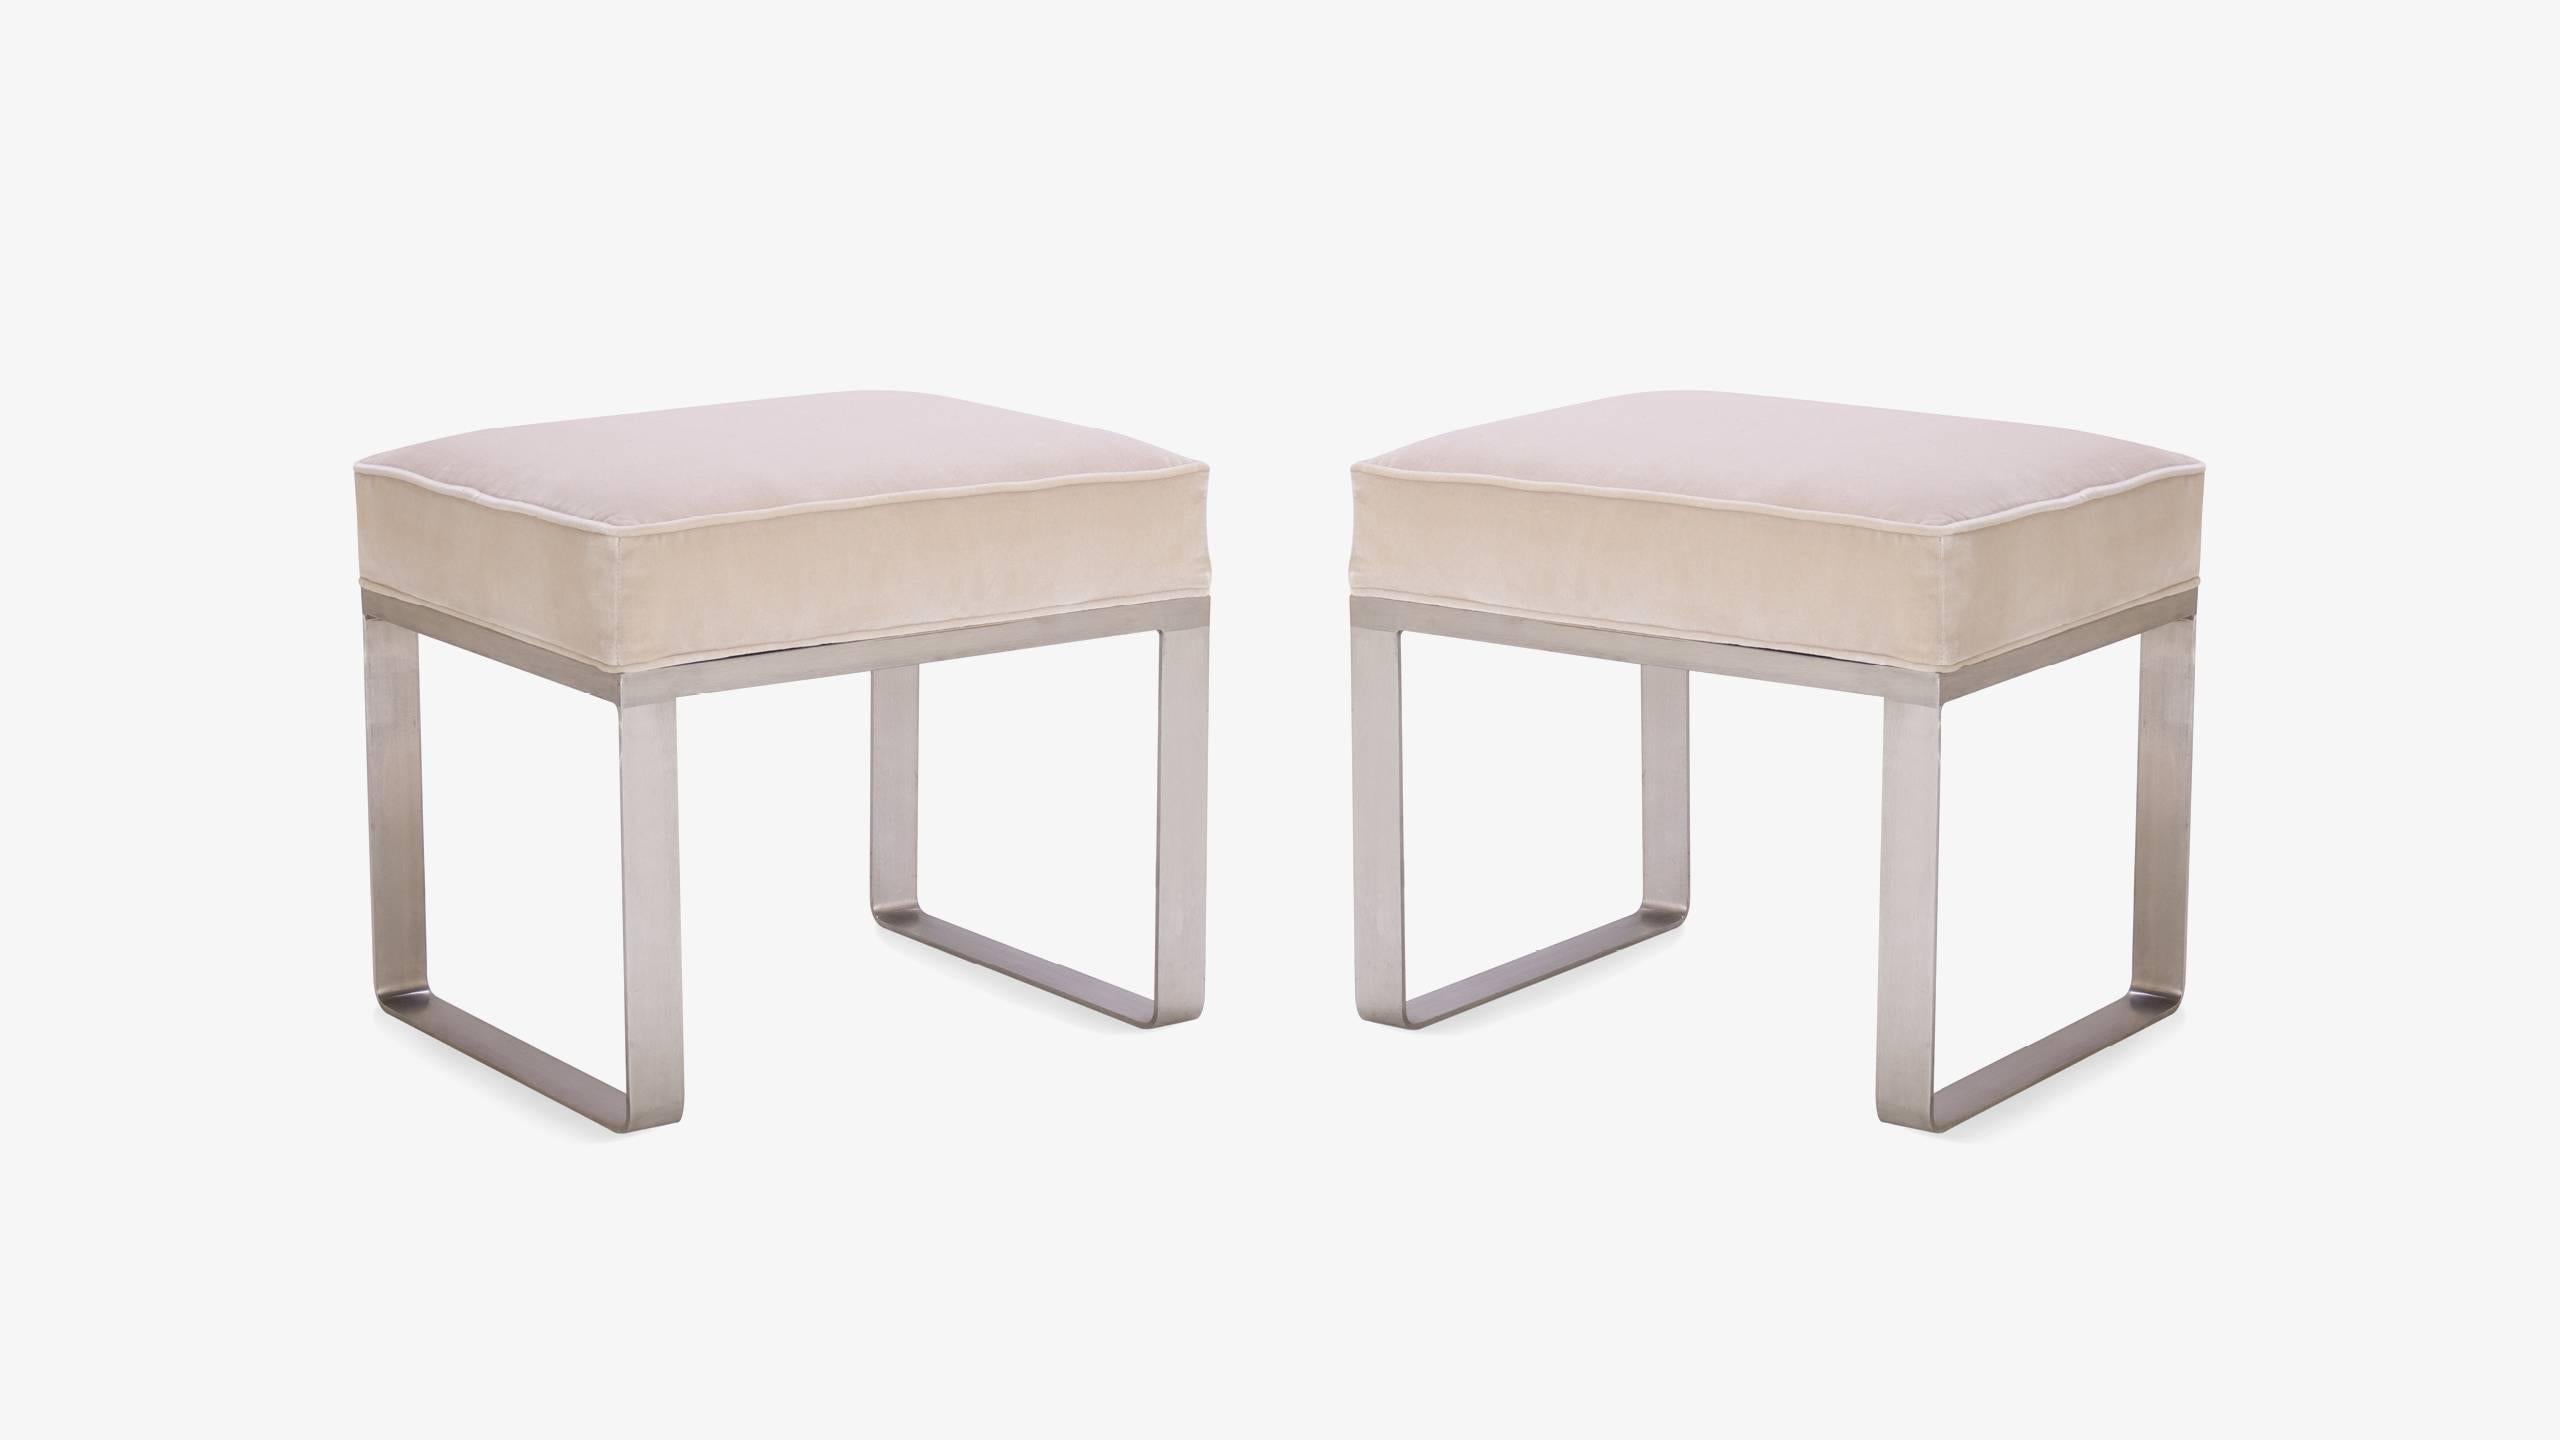 A pair of chic ottomans from the Ritz-Carlton hotel. The design exudes a minimalistic modernity with its brushed steel base. Perfect as a pair in a living space or at the foot of a bed, even as a single at a vanity. A generous cushion tops the base;